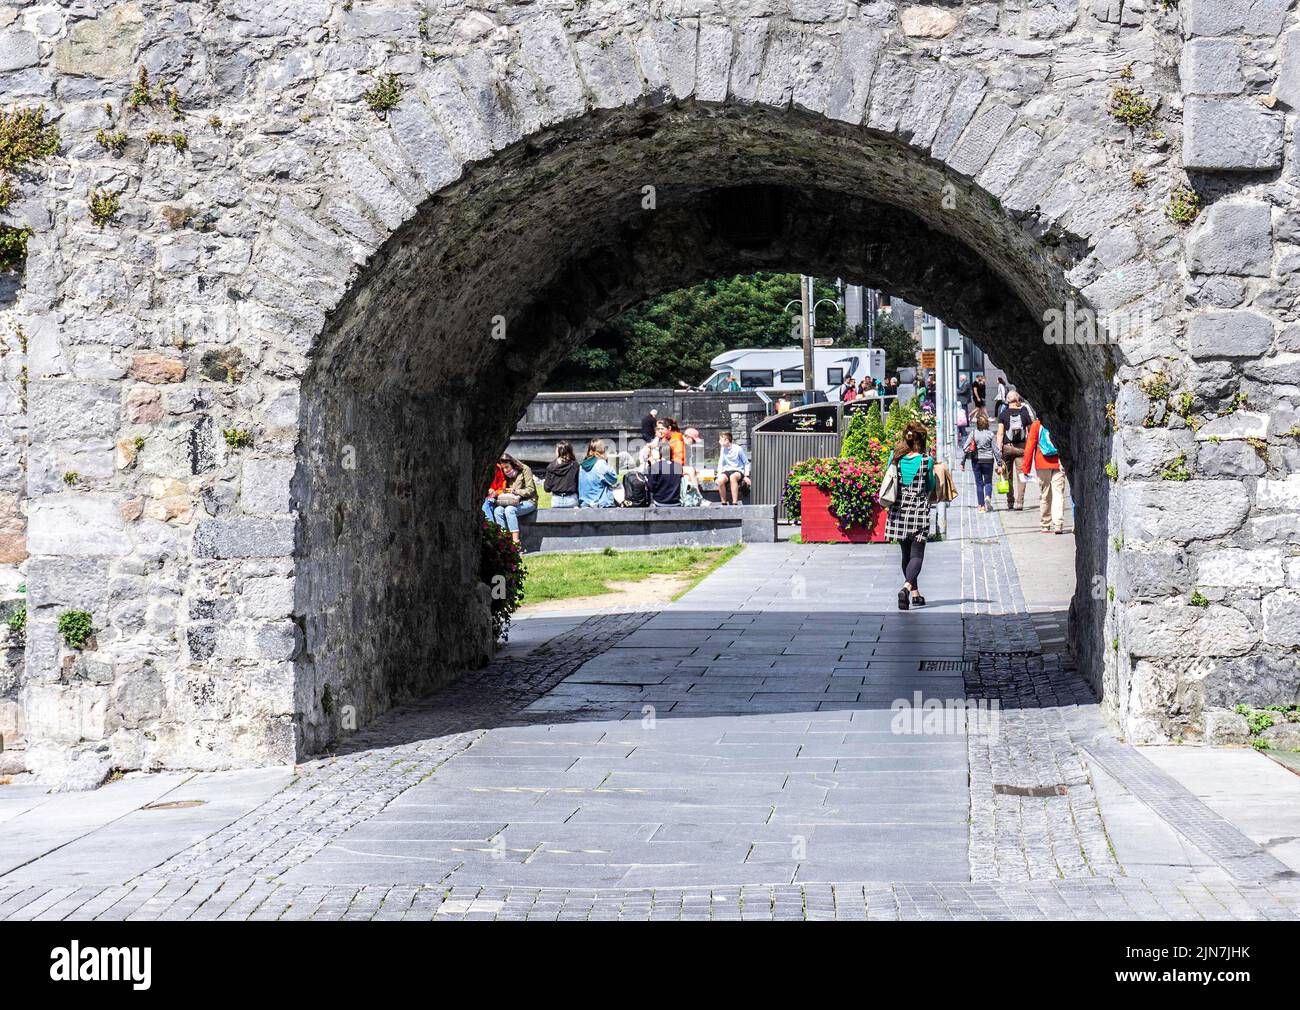 The Spanish Arch section of Galway City, Ireland. A medieval building constructed in 1584, the name refers to the Spanish trade with Galway. Stock Photo